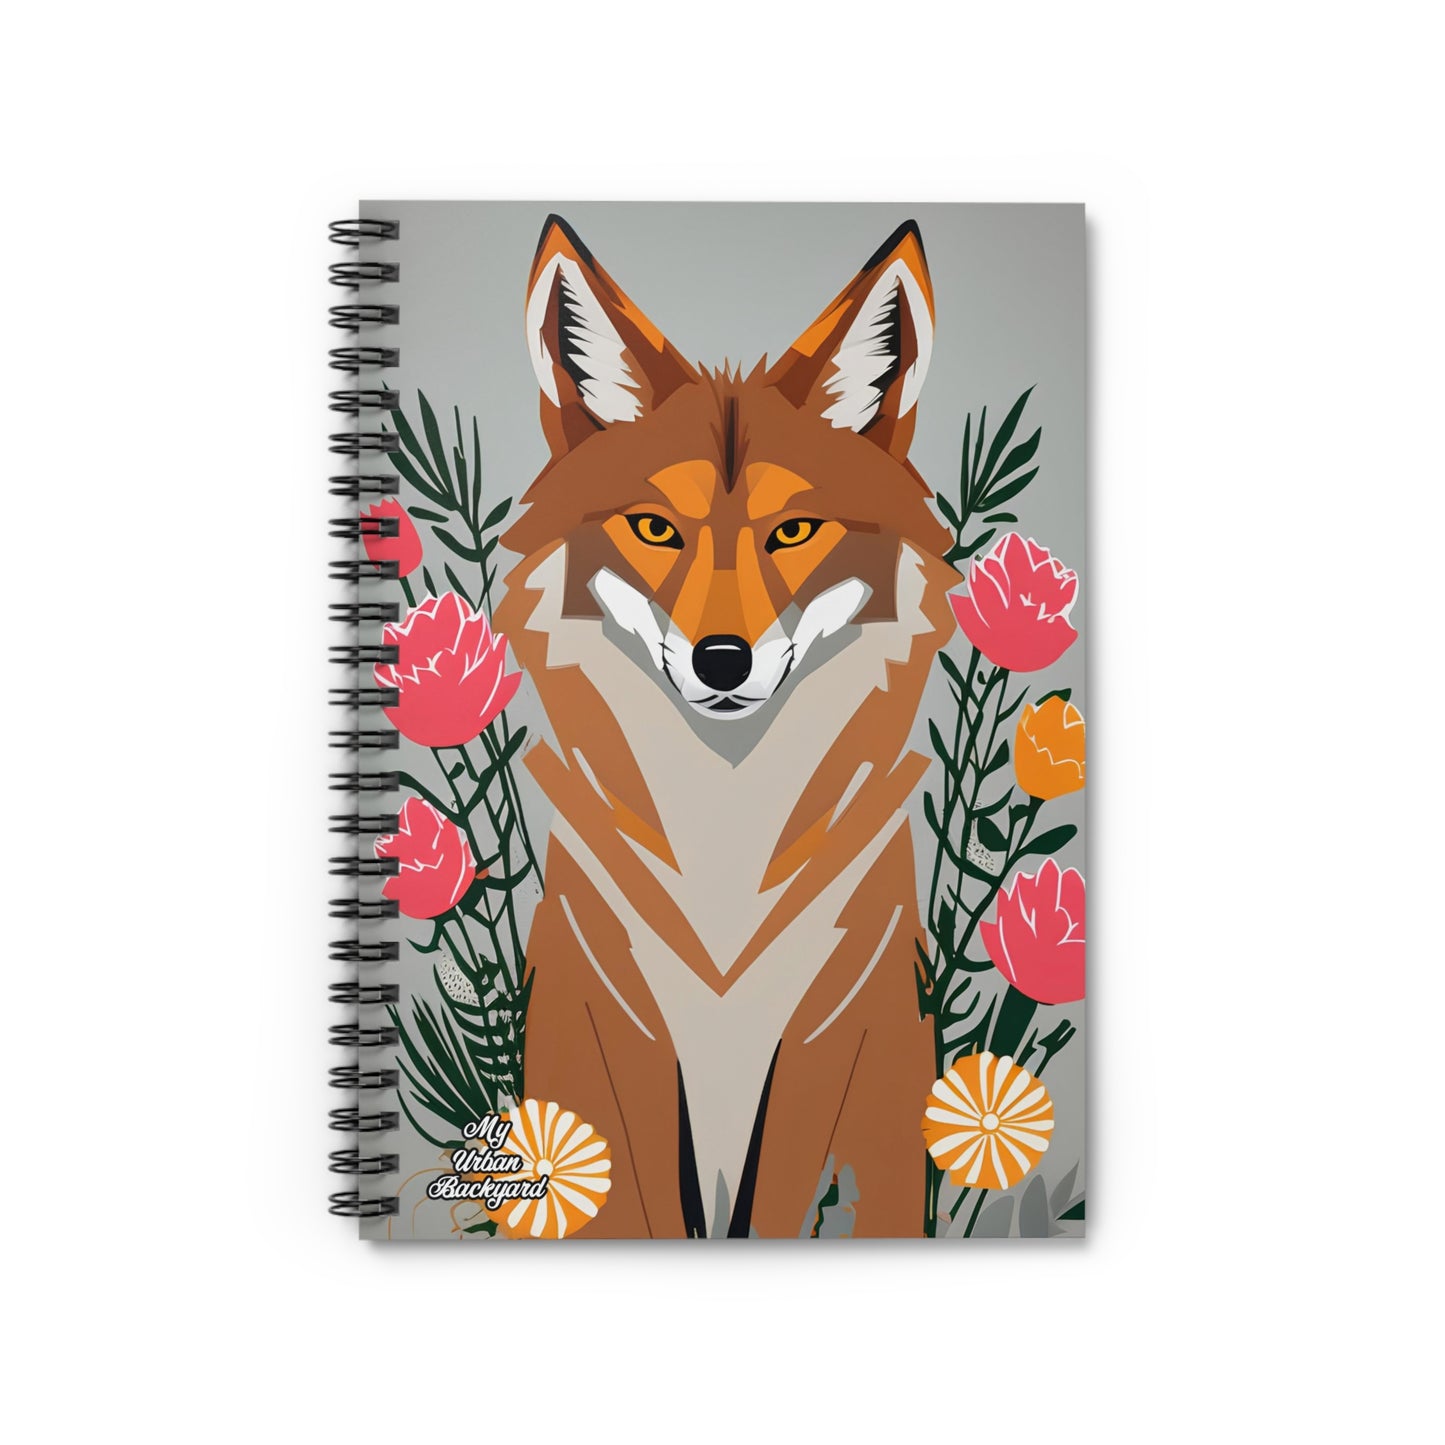 Coyote with Flowers, Spiral Notebook Journal - Write in Style